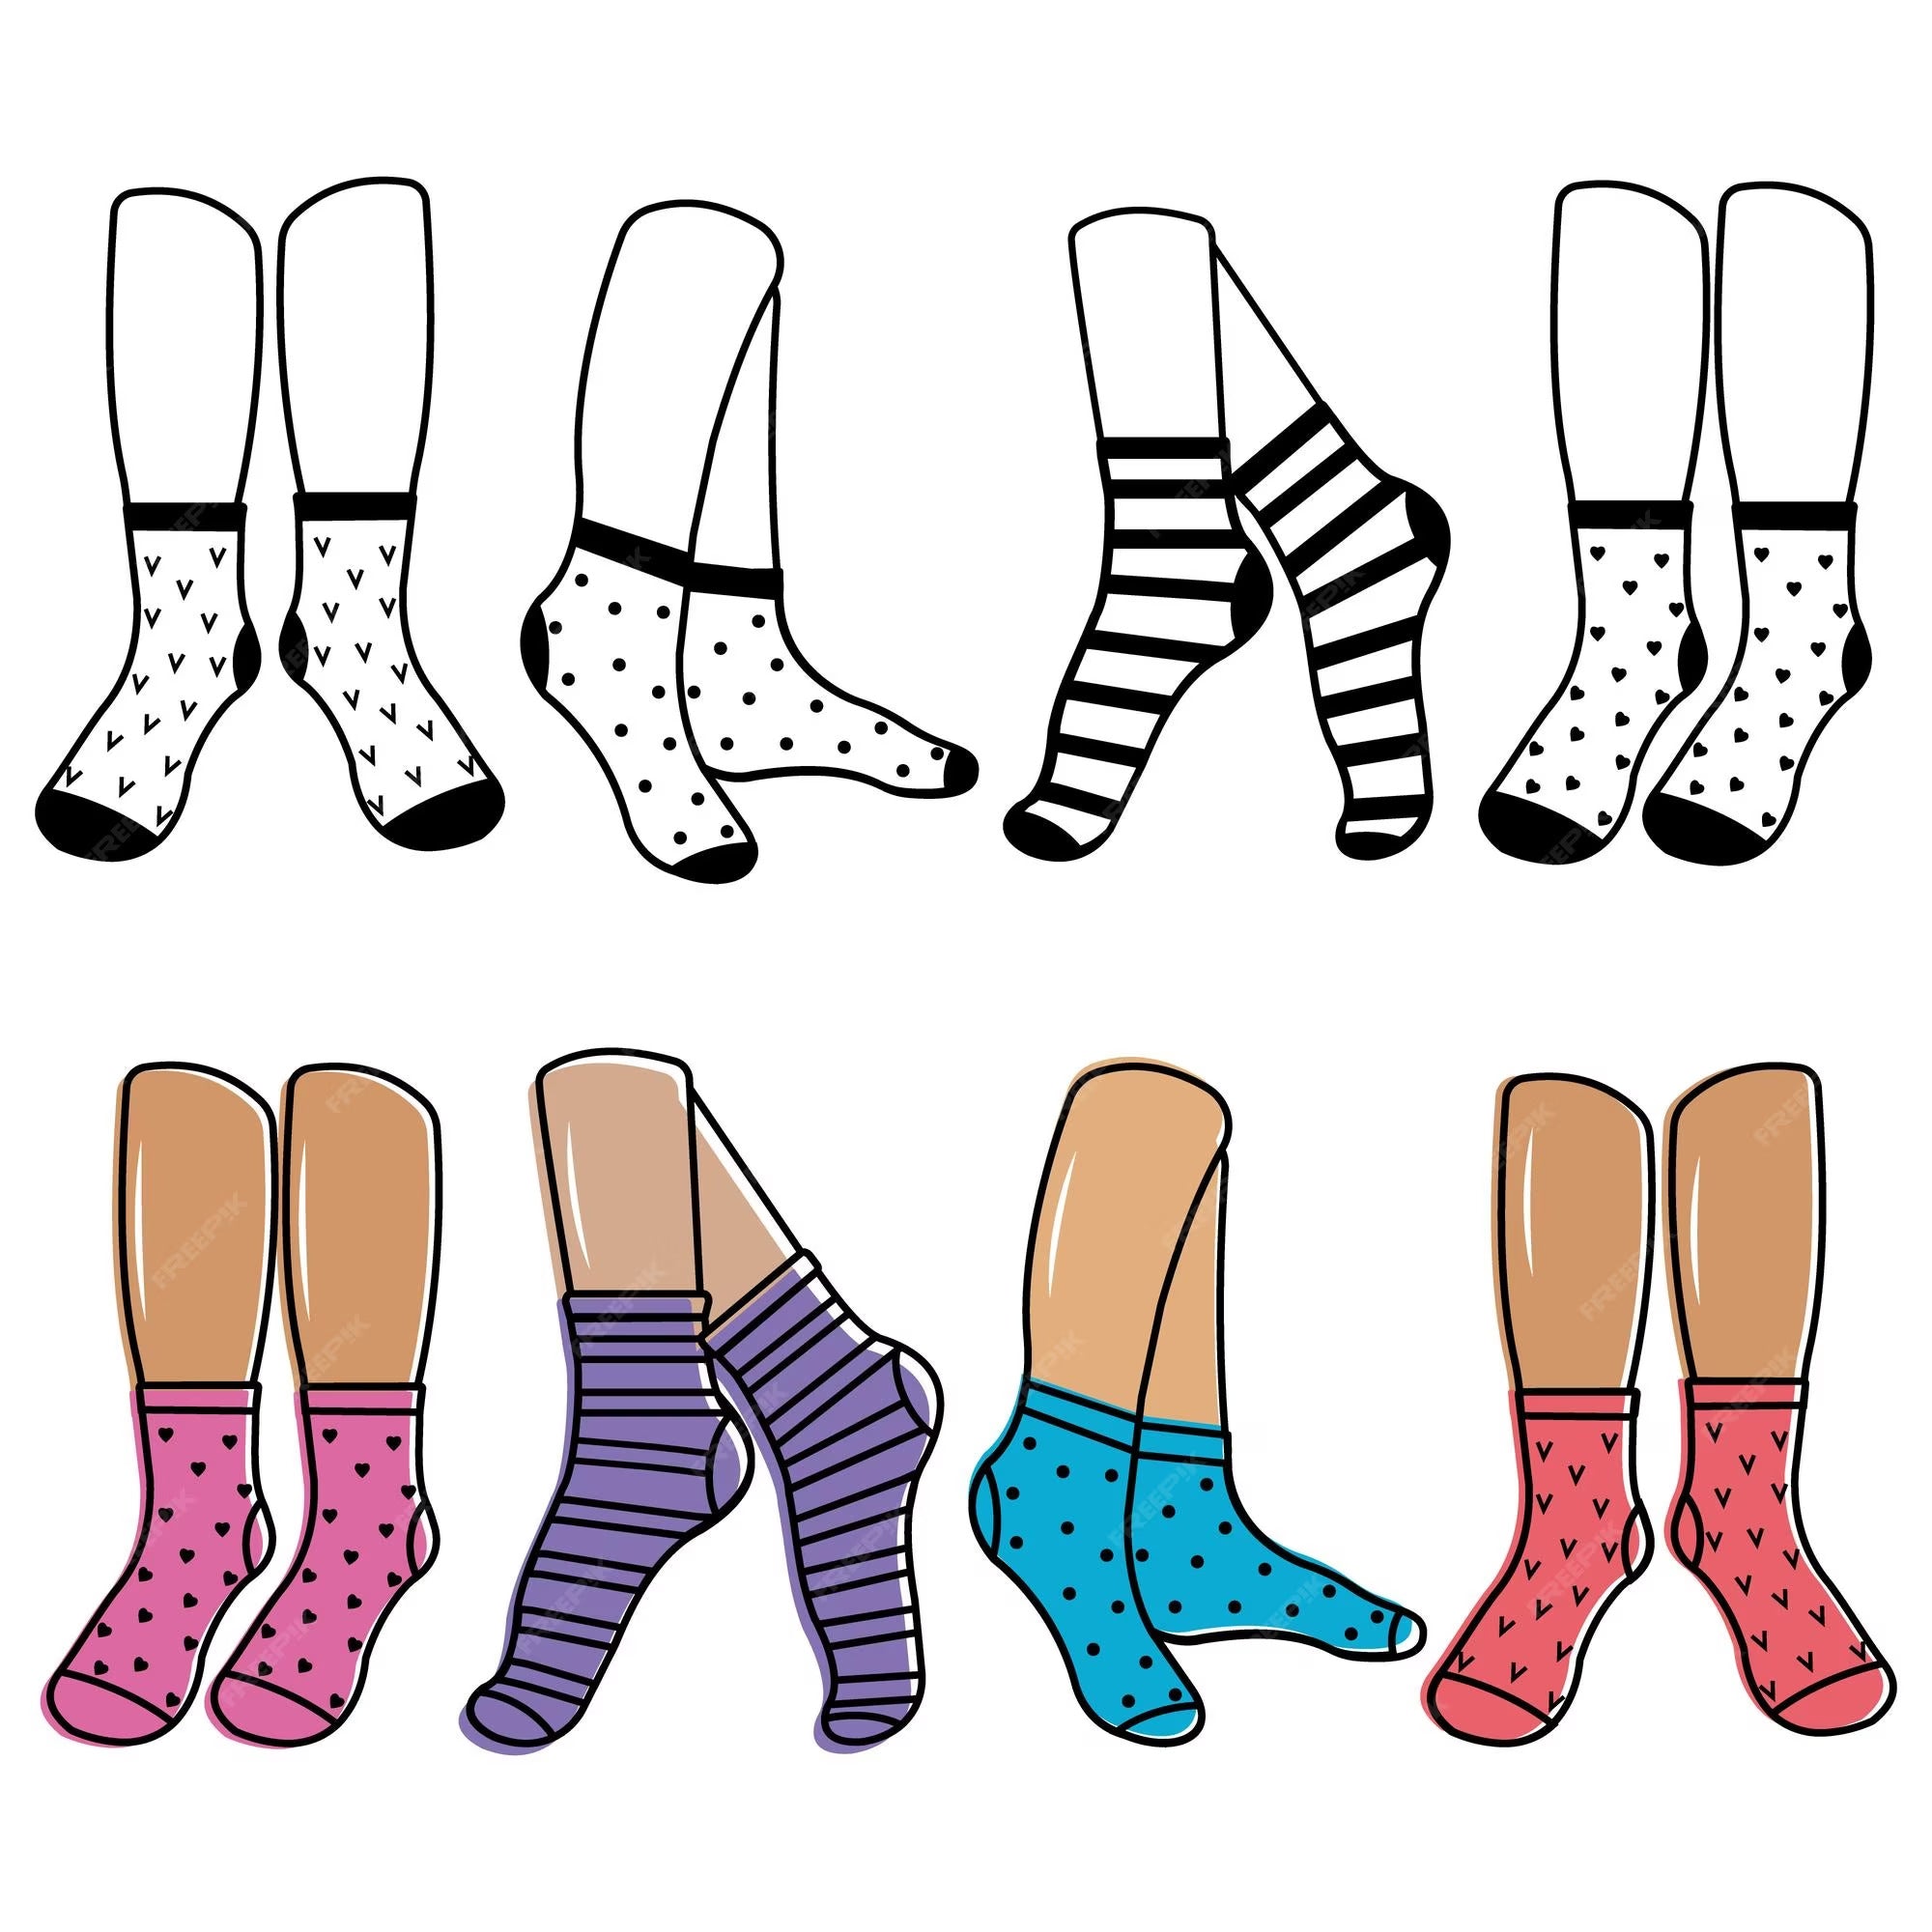 Step Up Your Sock Game With Best Socks Brand in India